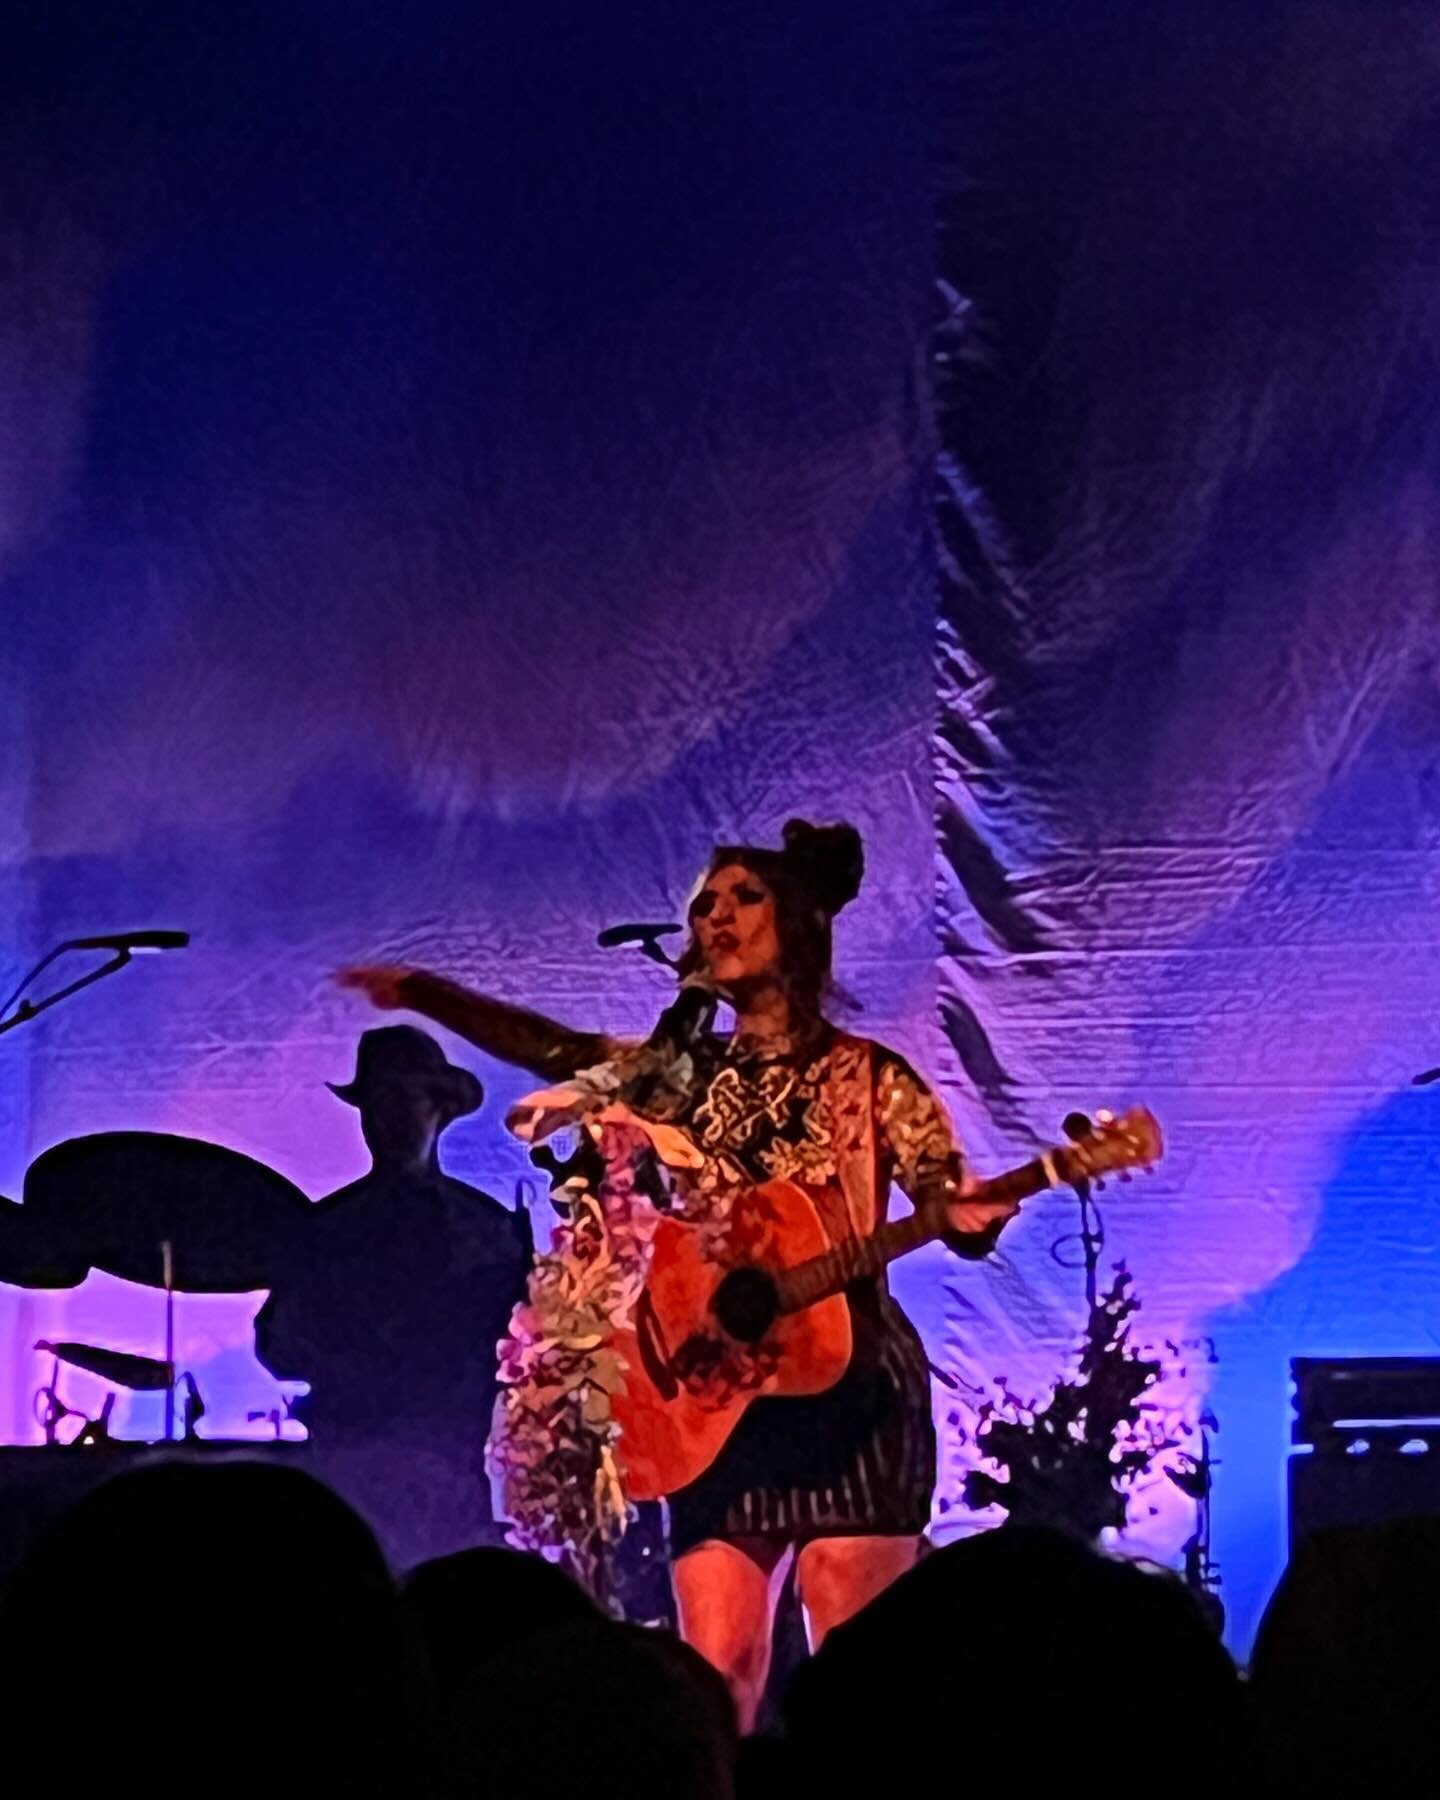 Sierra Ferrell played to a packed house @fillmorenc and I&rsquo;m glad I was there for it with family and friends 
☺️❤️ Amazing singer, love her songs (and great band) and the &lsquo;busking&rsquo; vibe.. strong, musical, and fun !